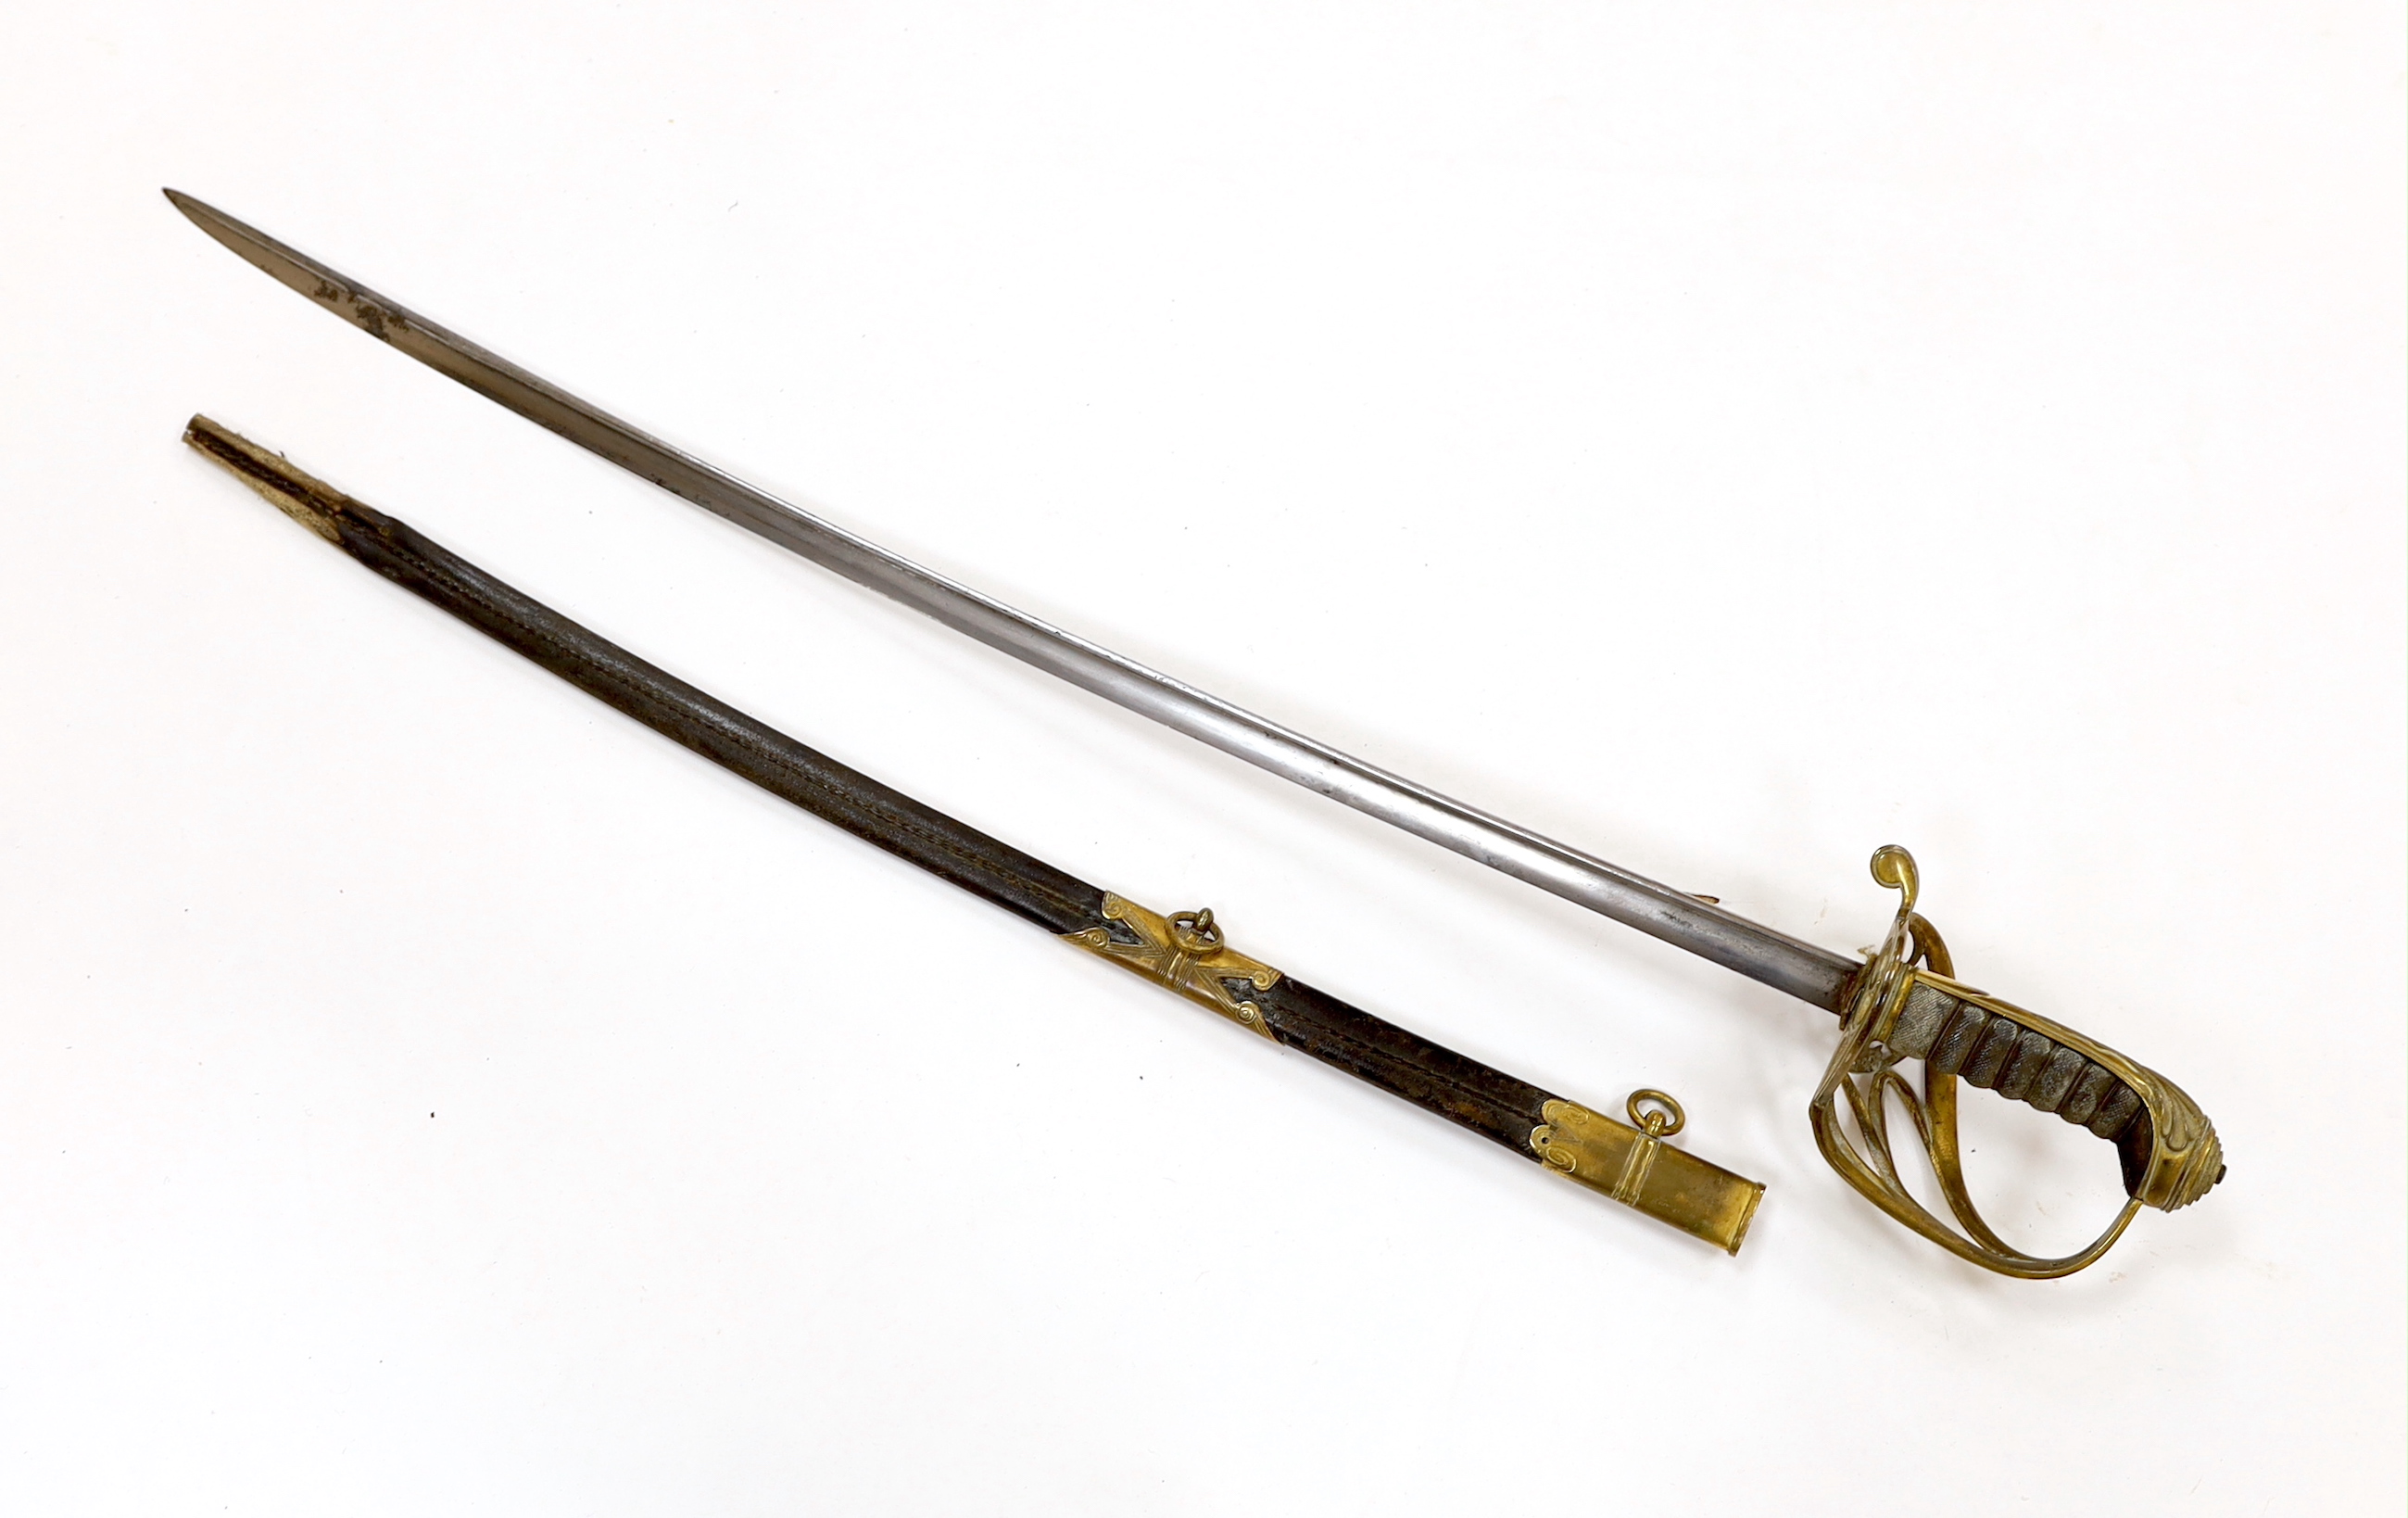 A William IV infantry officer’s sword, in a leather scabbard, blade 72.5cm